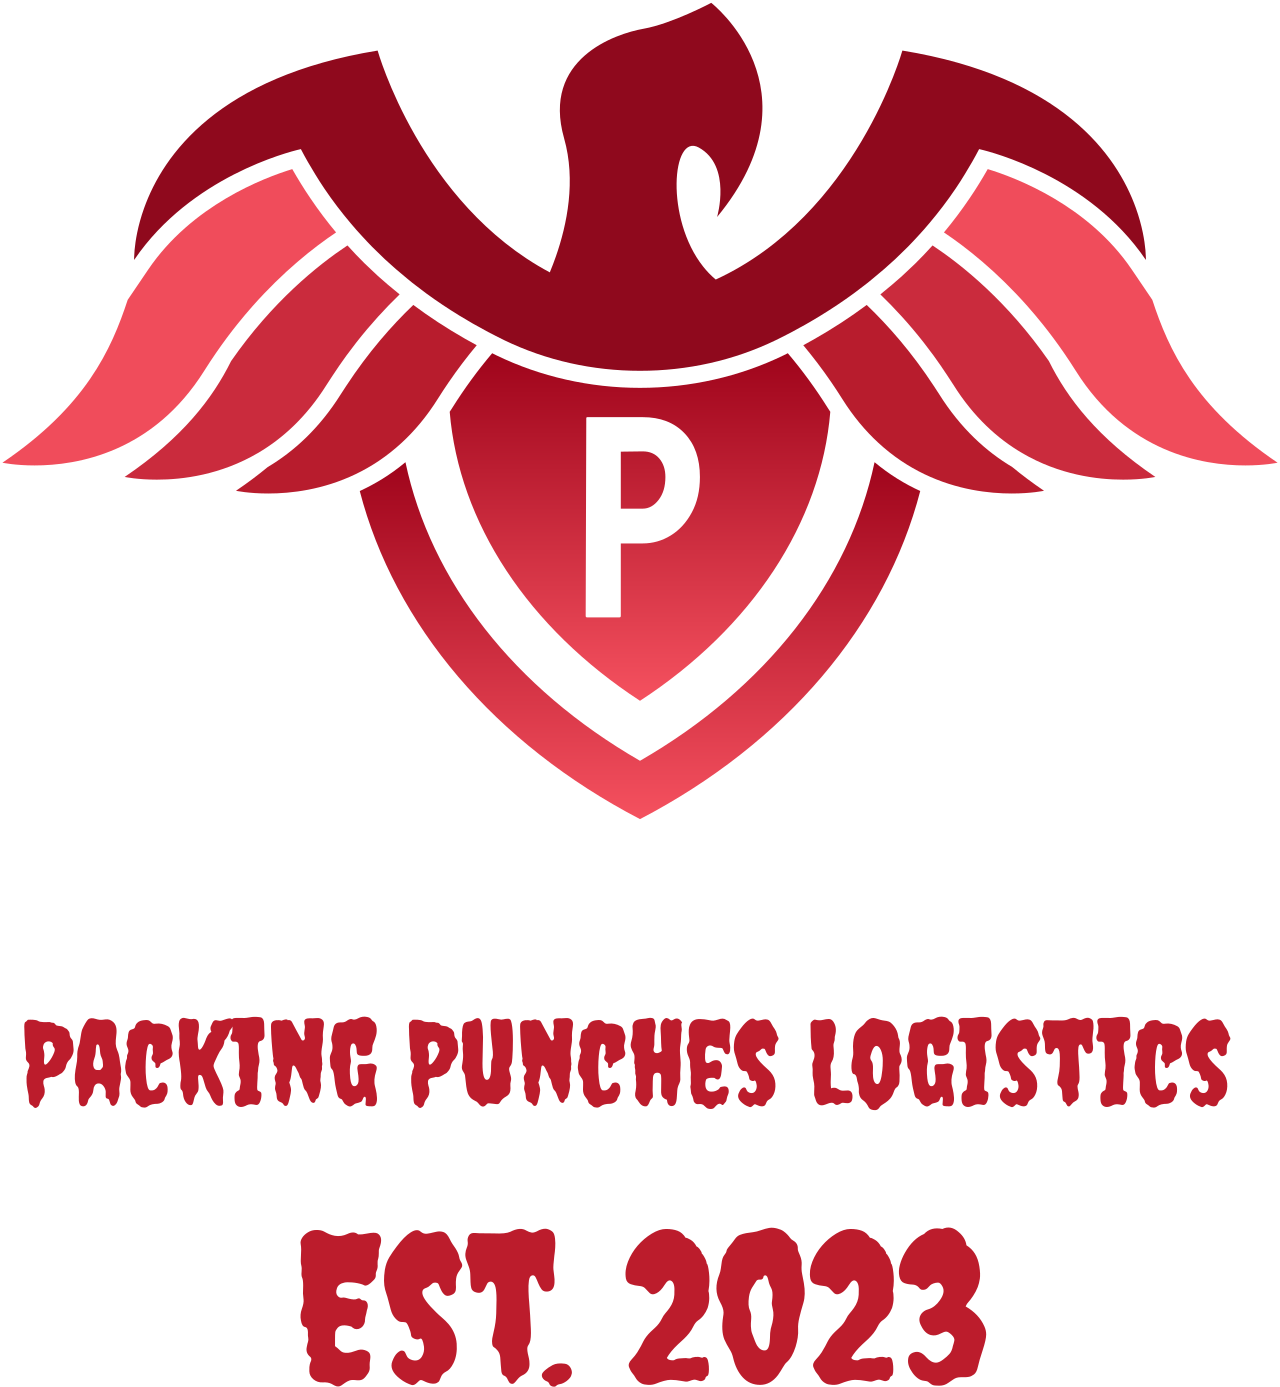 Packing Punches Logistics 's logo